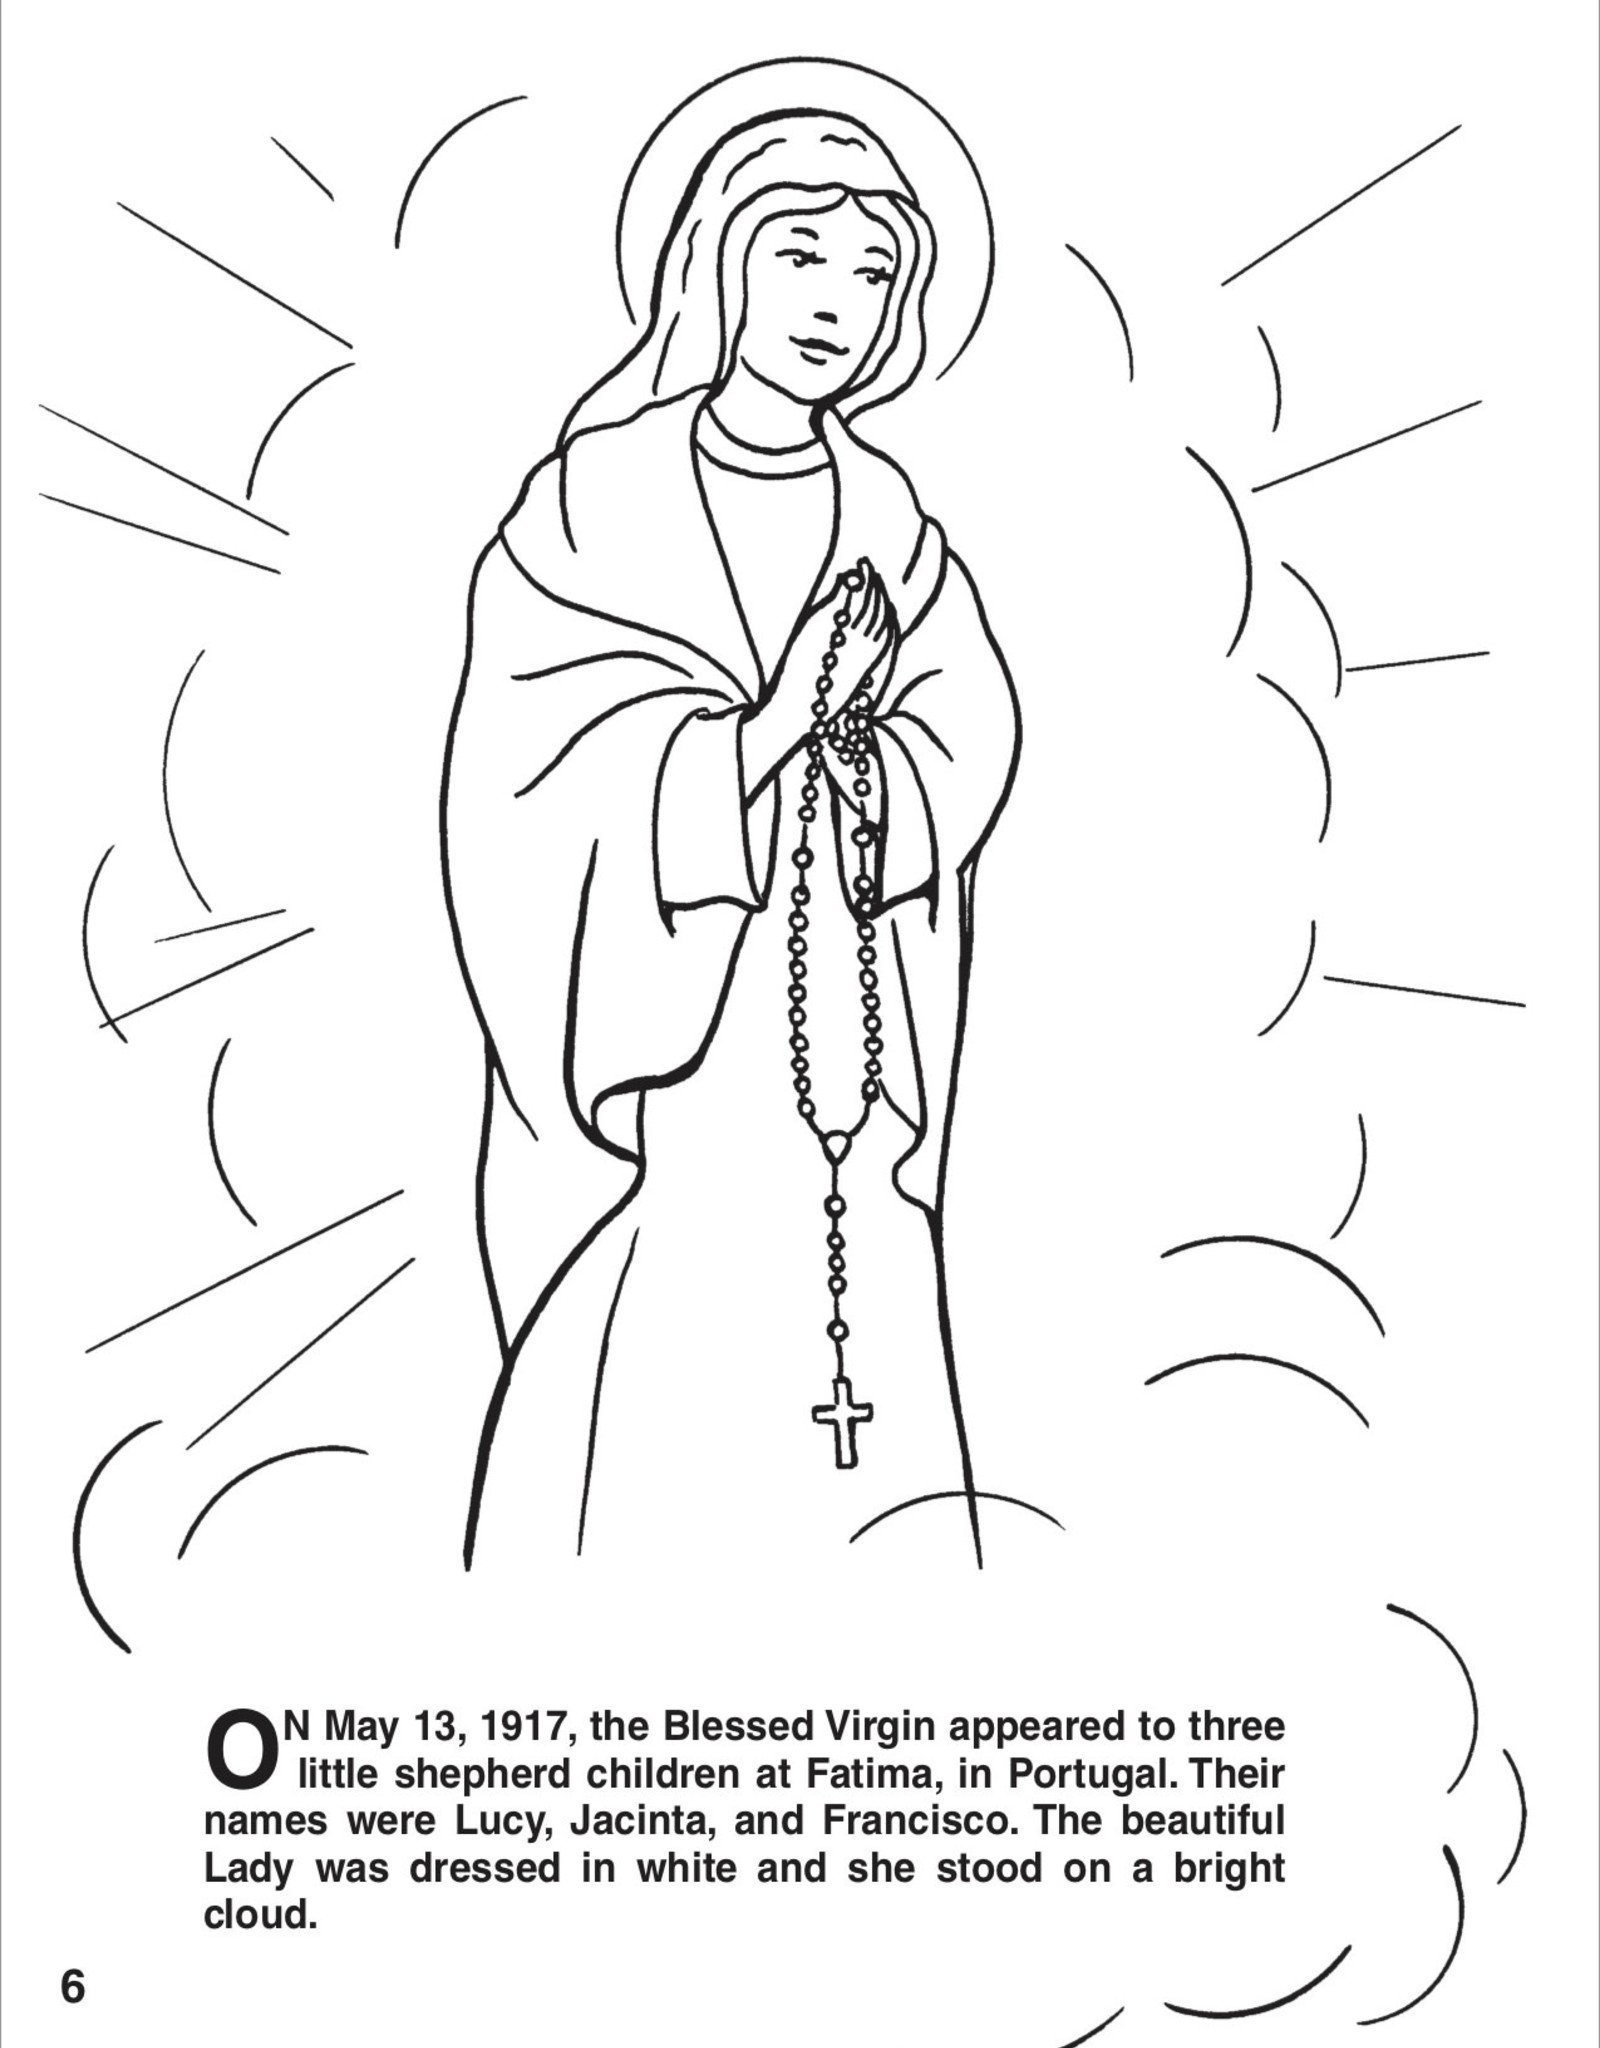 Catholic Book Publishing Coloring Book About the Rosary, by Lawrence Lovasik and pictures by Emma McKean